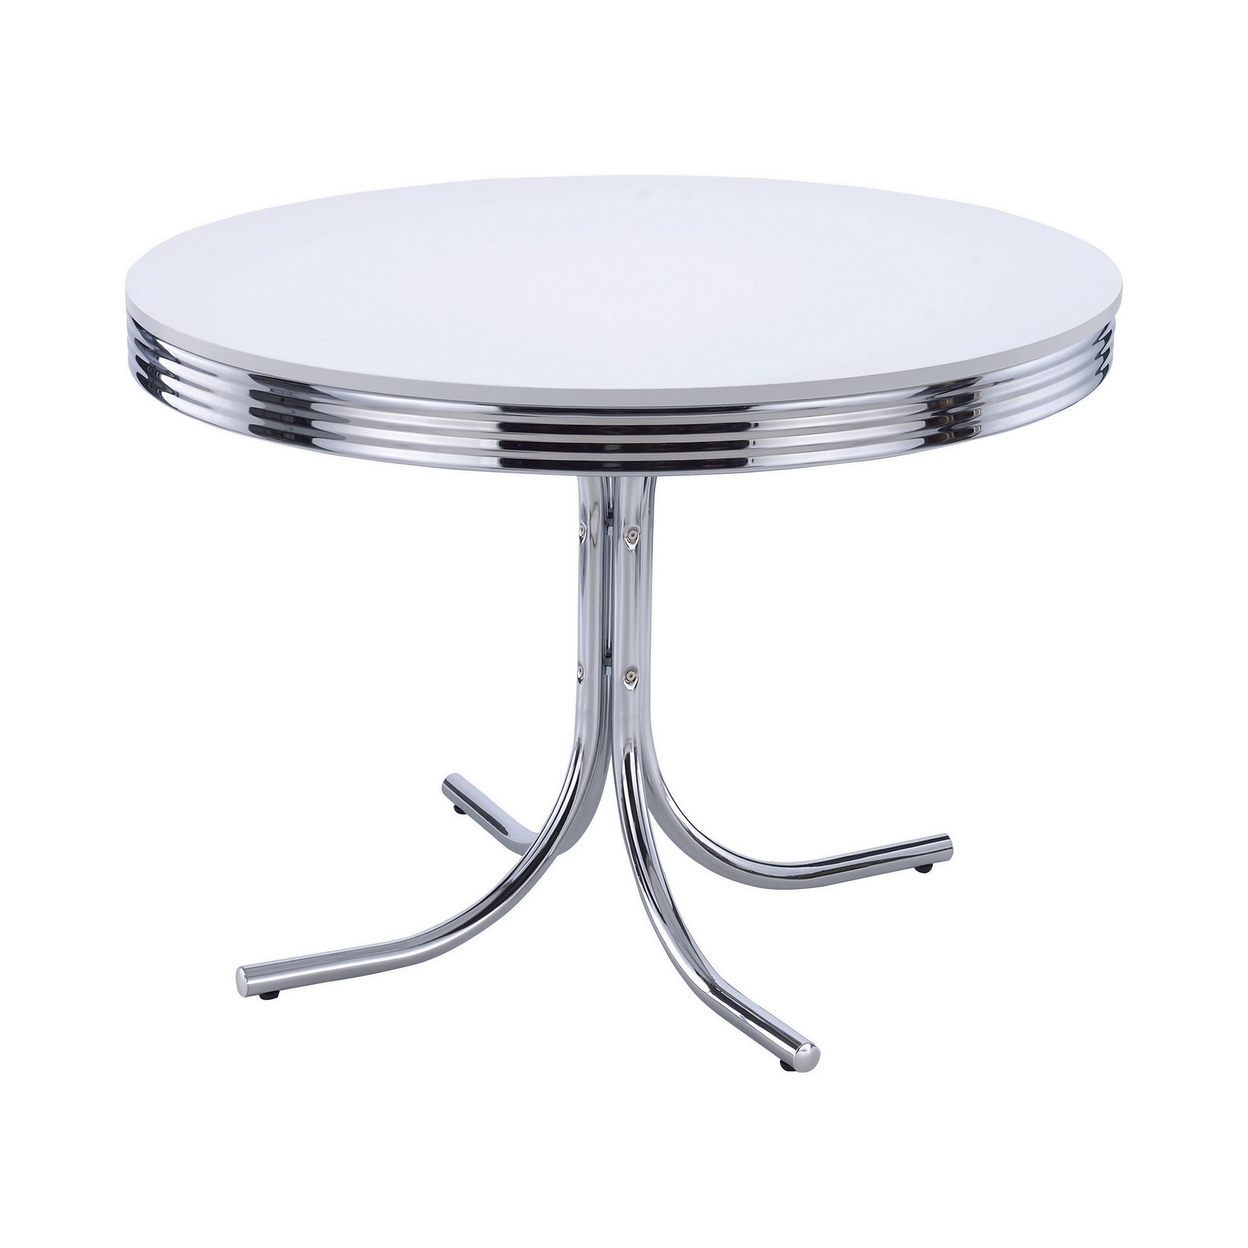 Loy 42 Inch Round Dining Table, Glossy White Wood Top, Ribbed Chrome Apron- Saltoro Sherpi